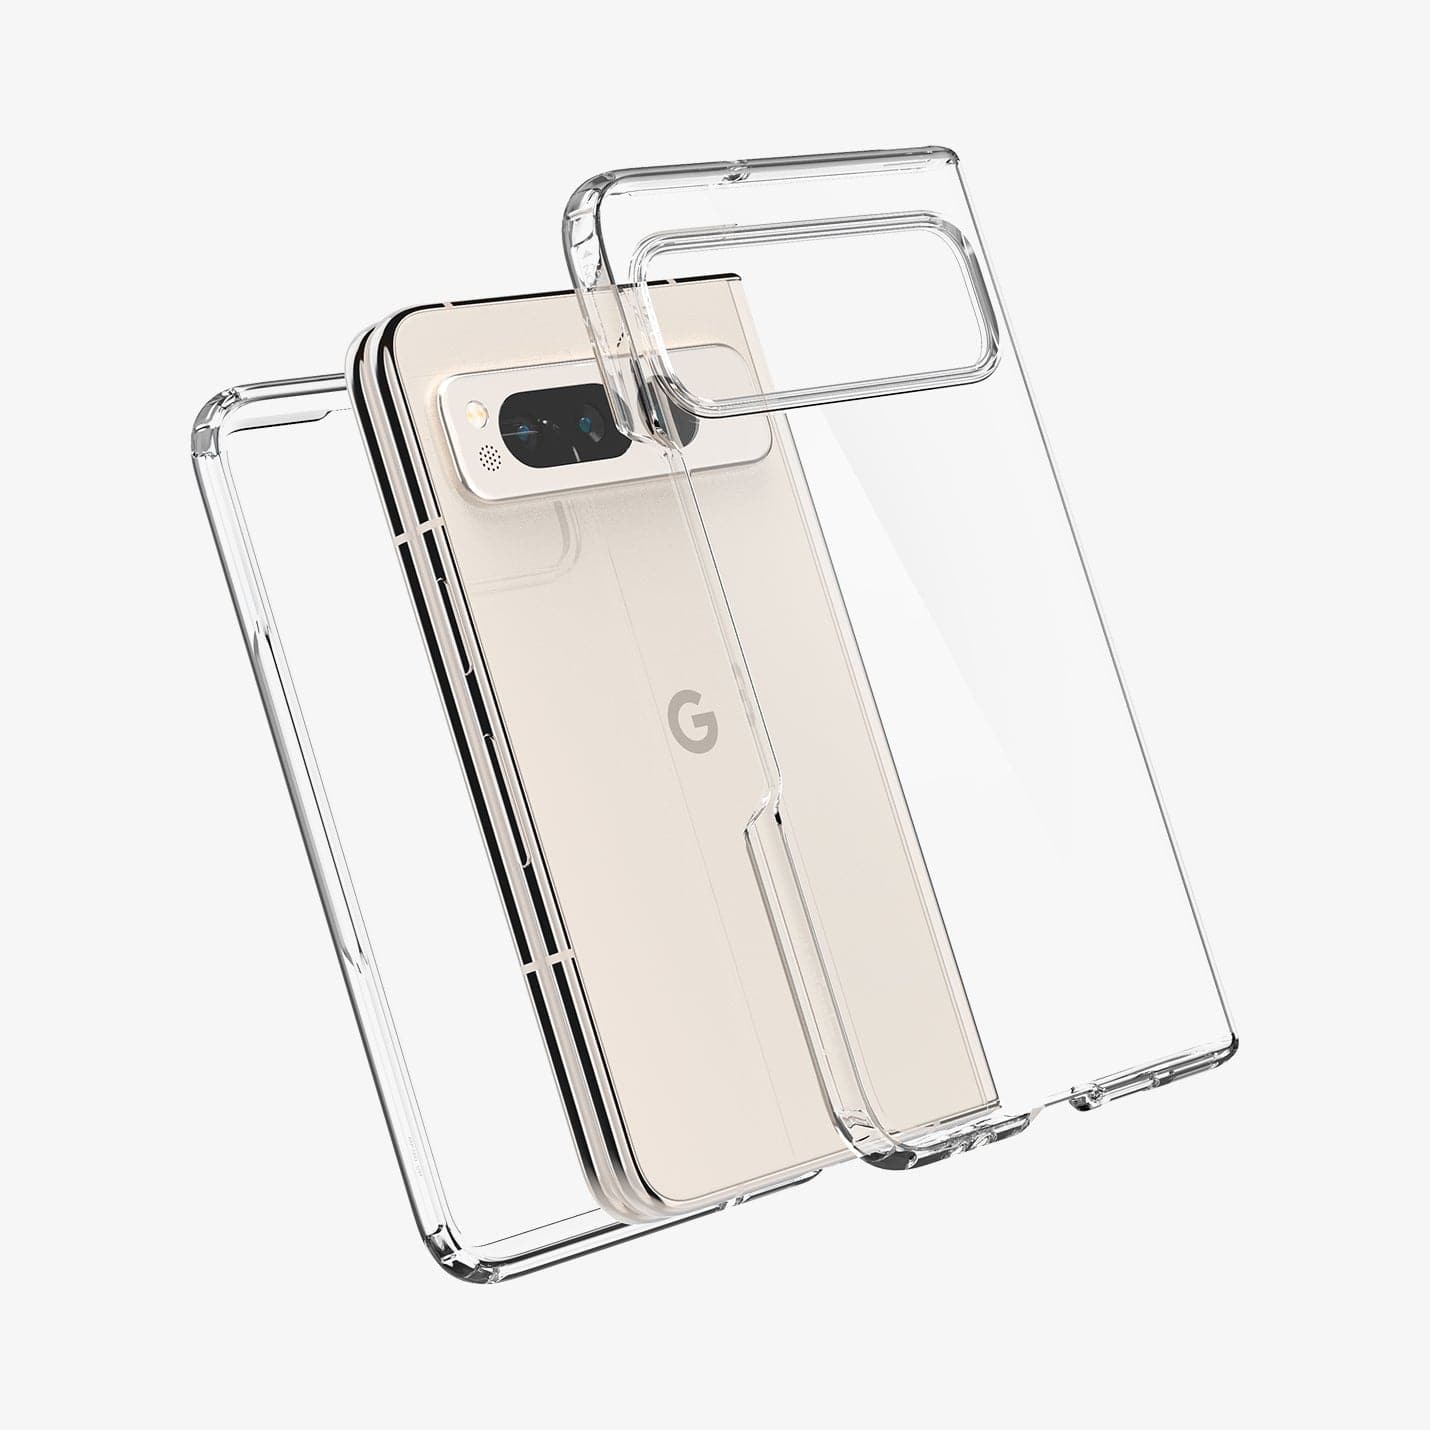 ACS05921 - Pixel Fold Series Case Ultra Hybrid in crystal clear showing the device with front and back of case hovering away